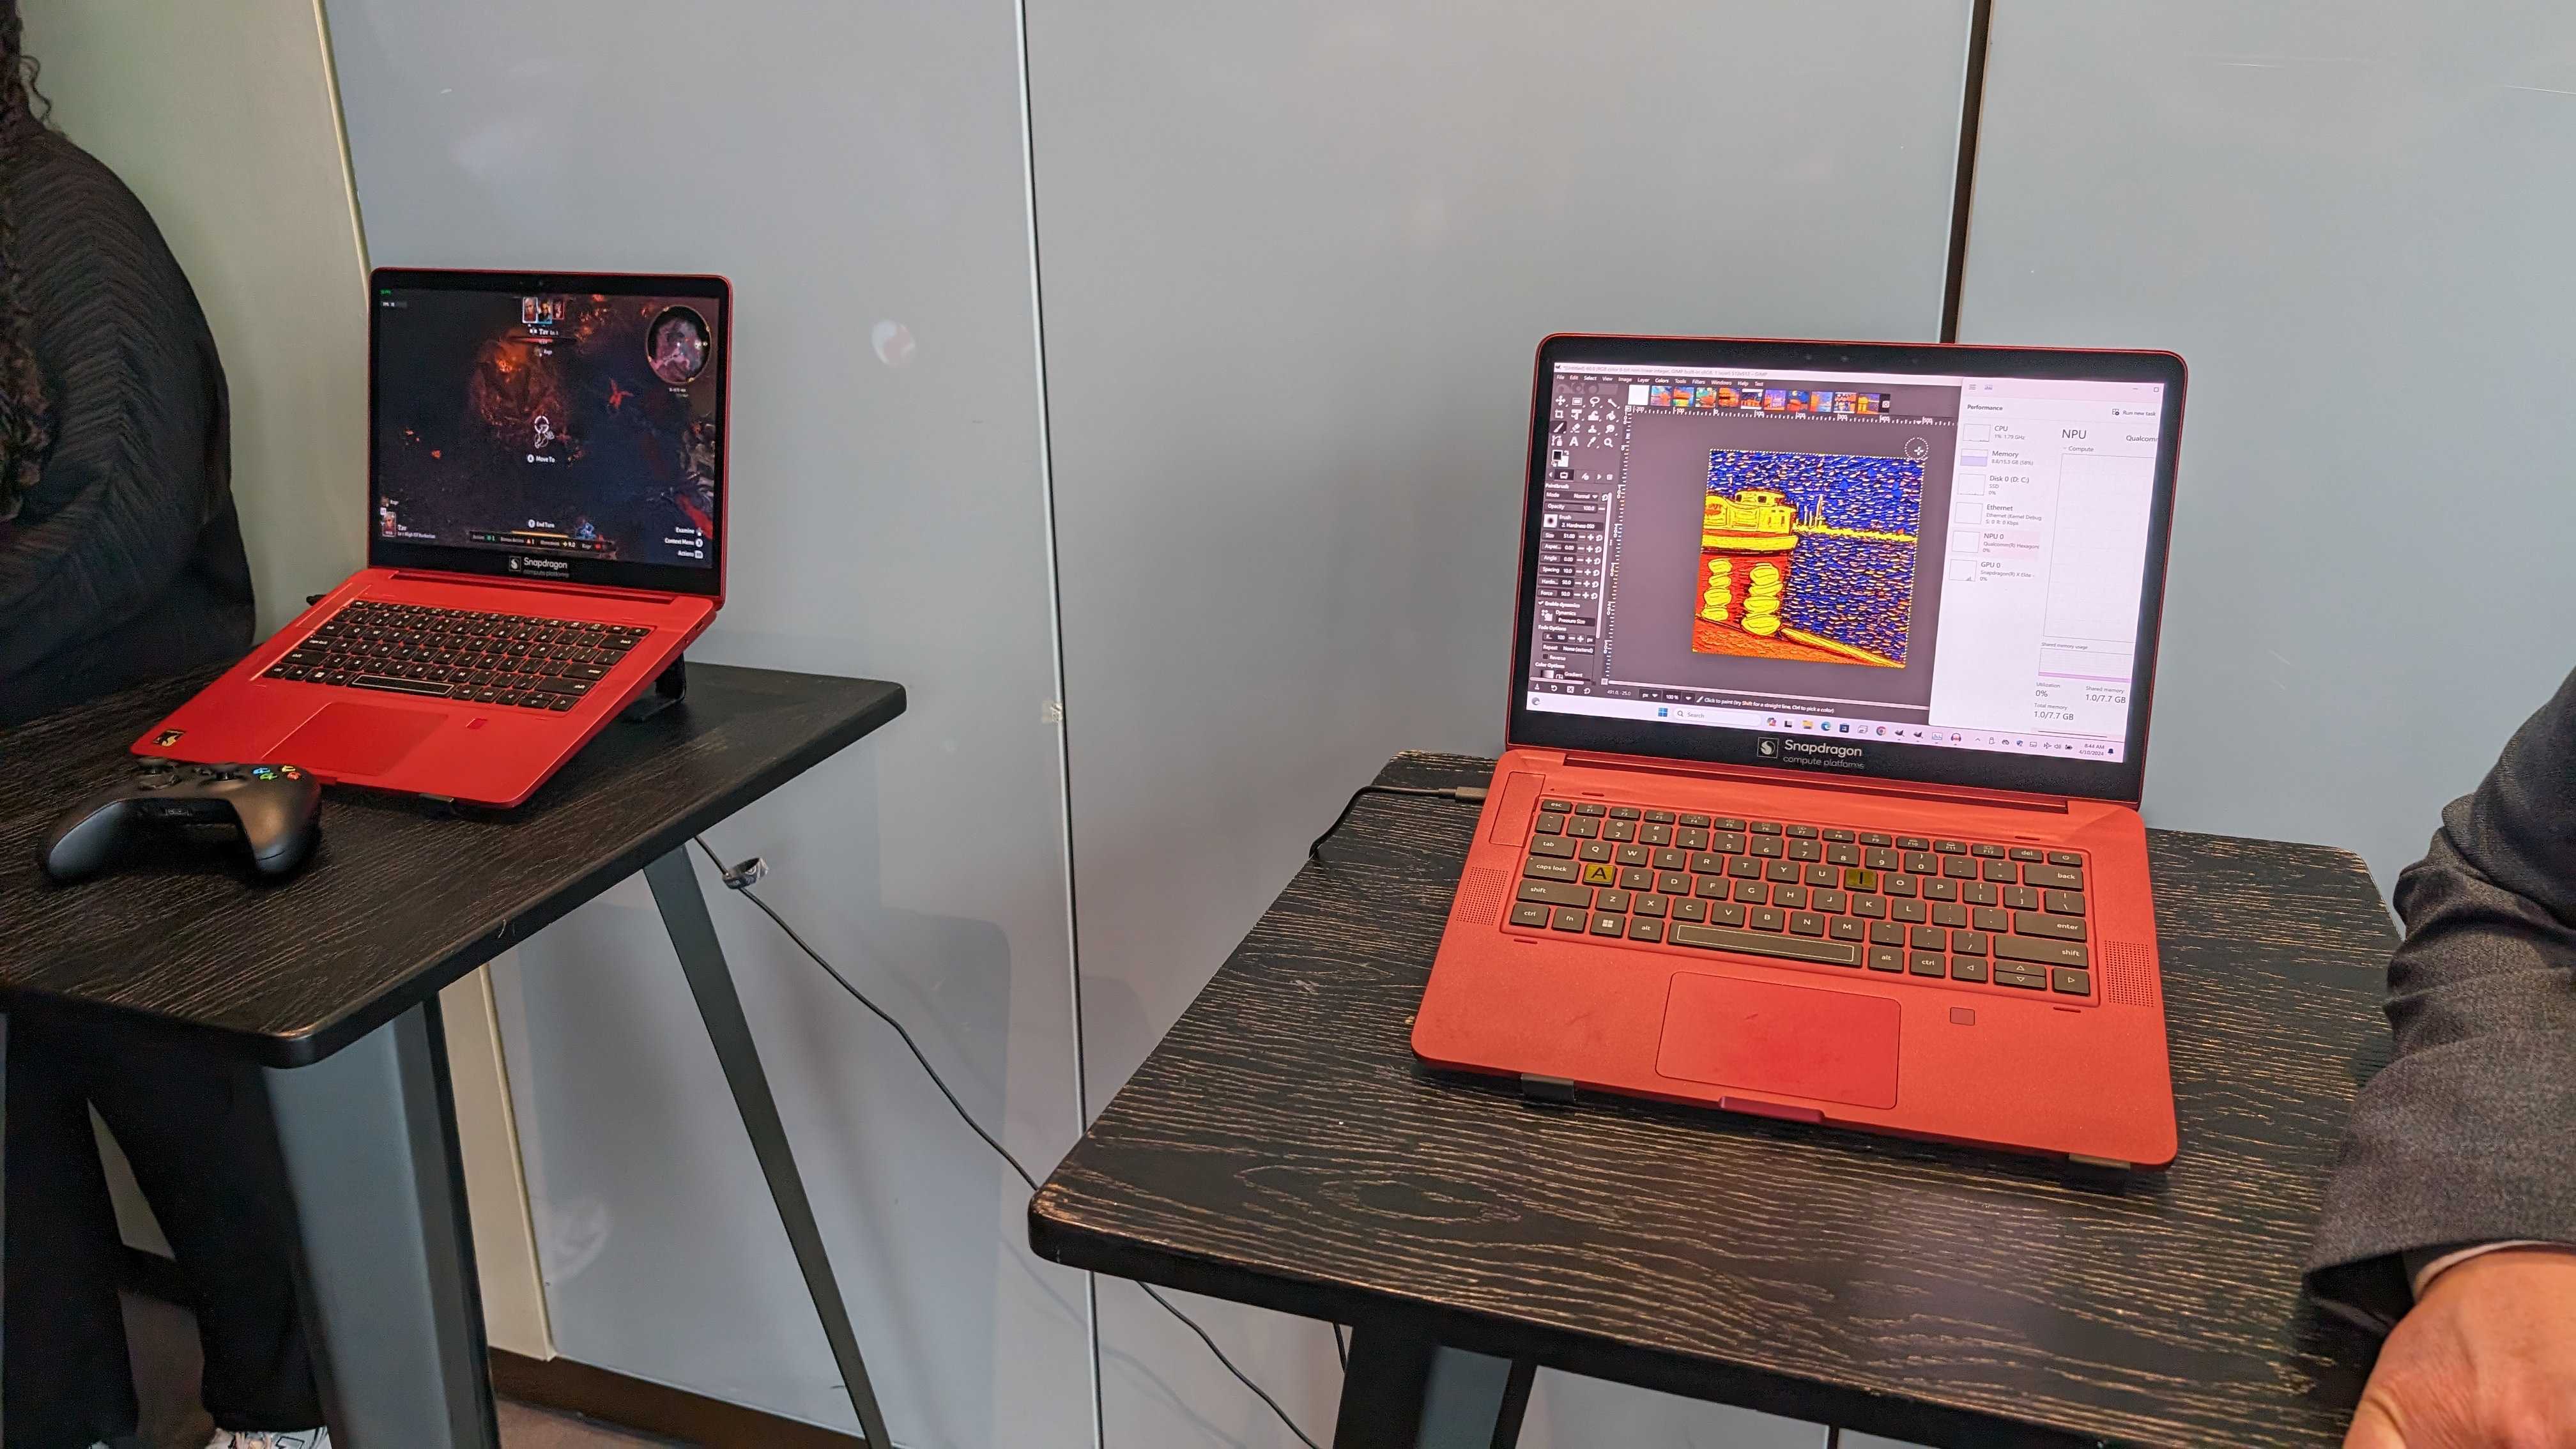 Two Qualcomm Snapdragon X Elite reference laptops running test software.